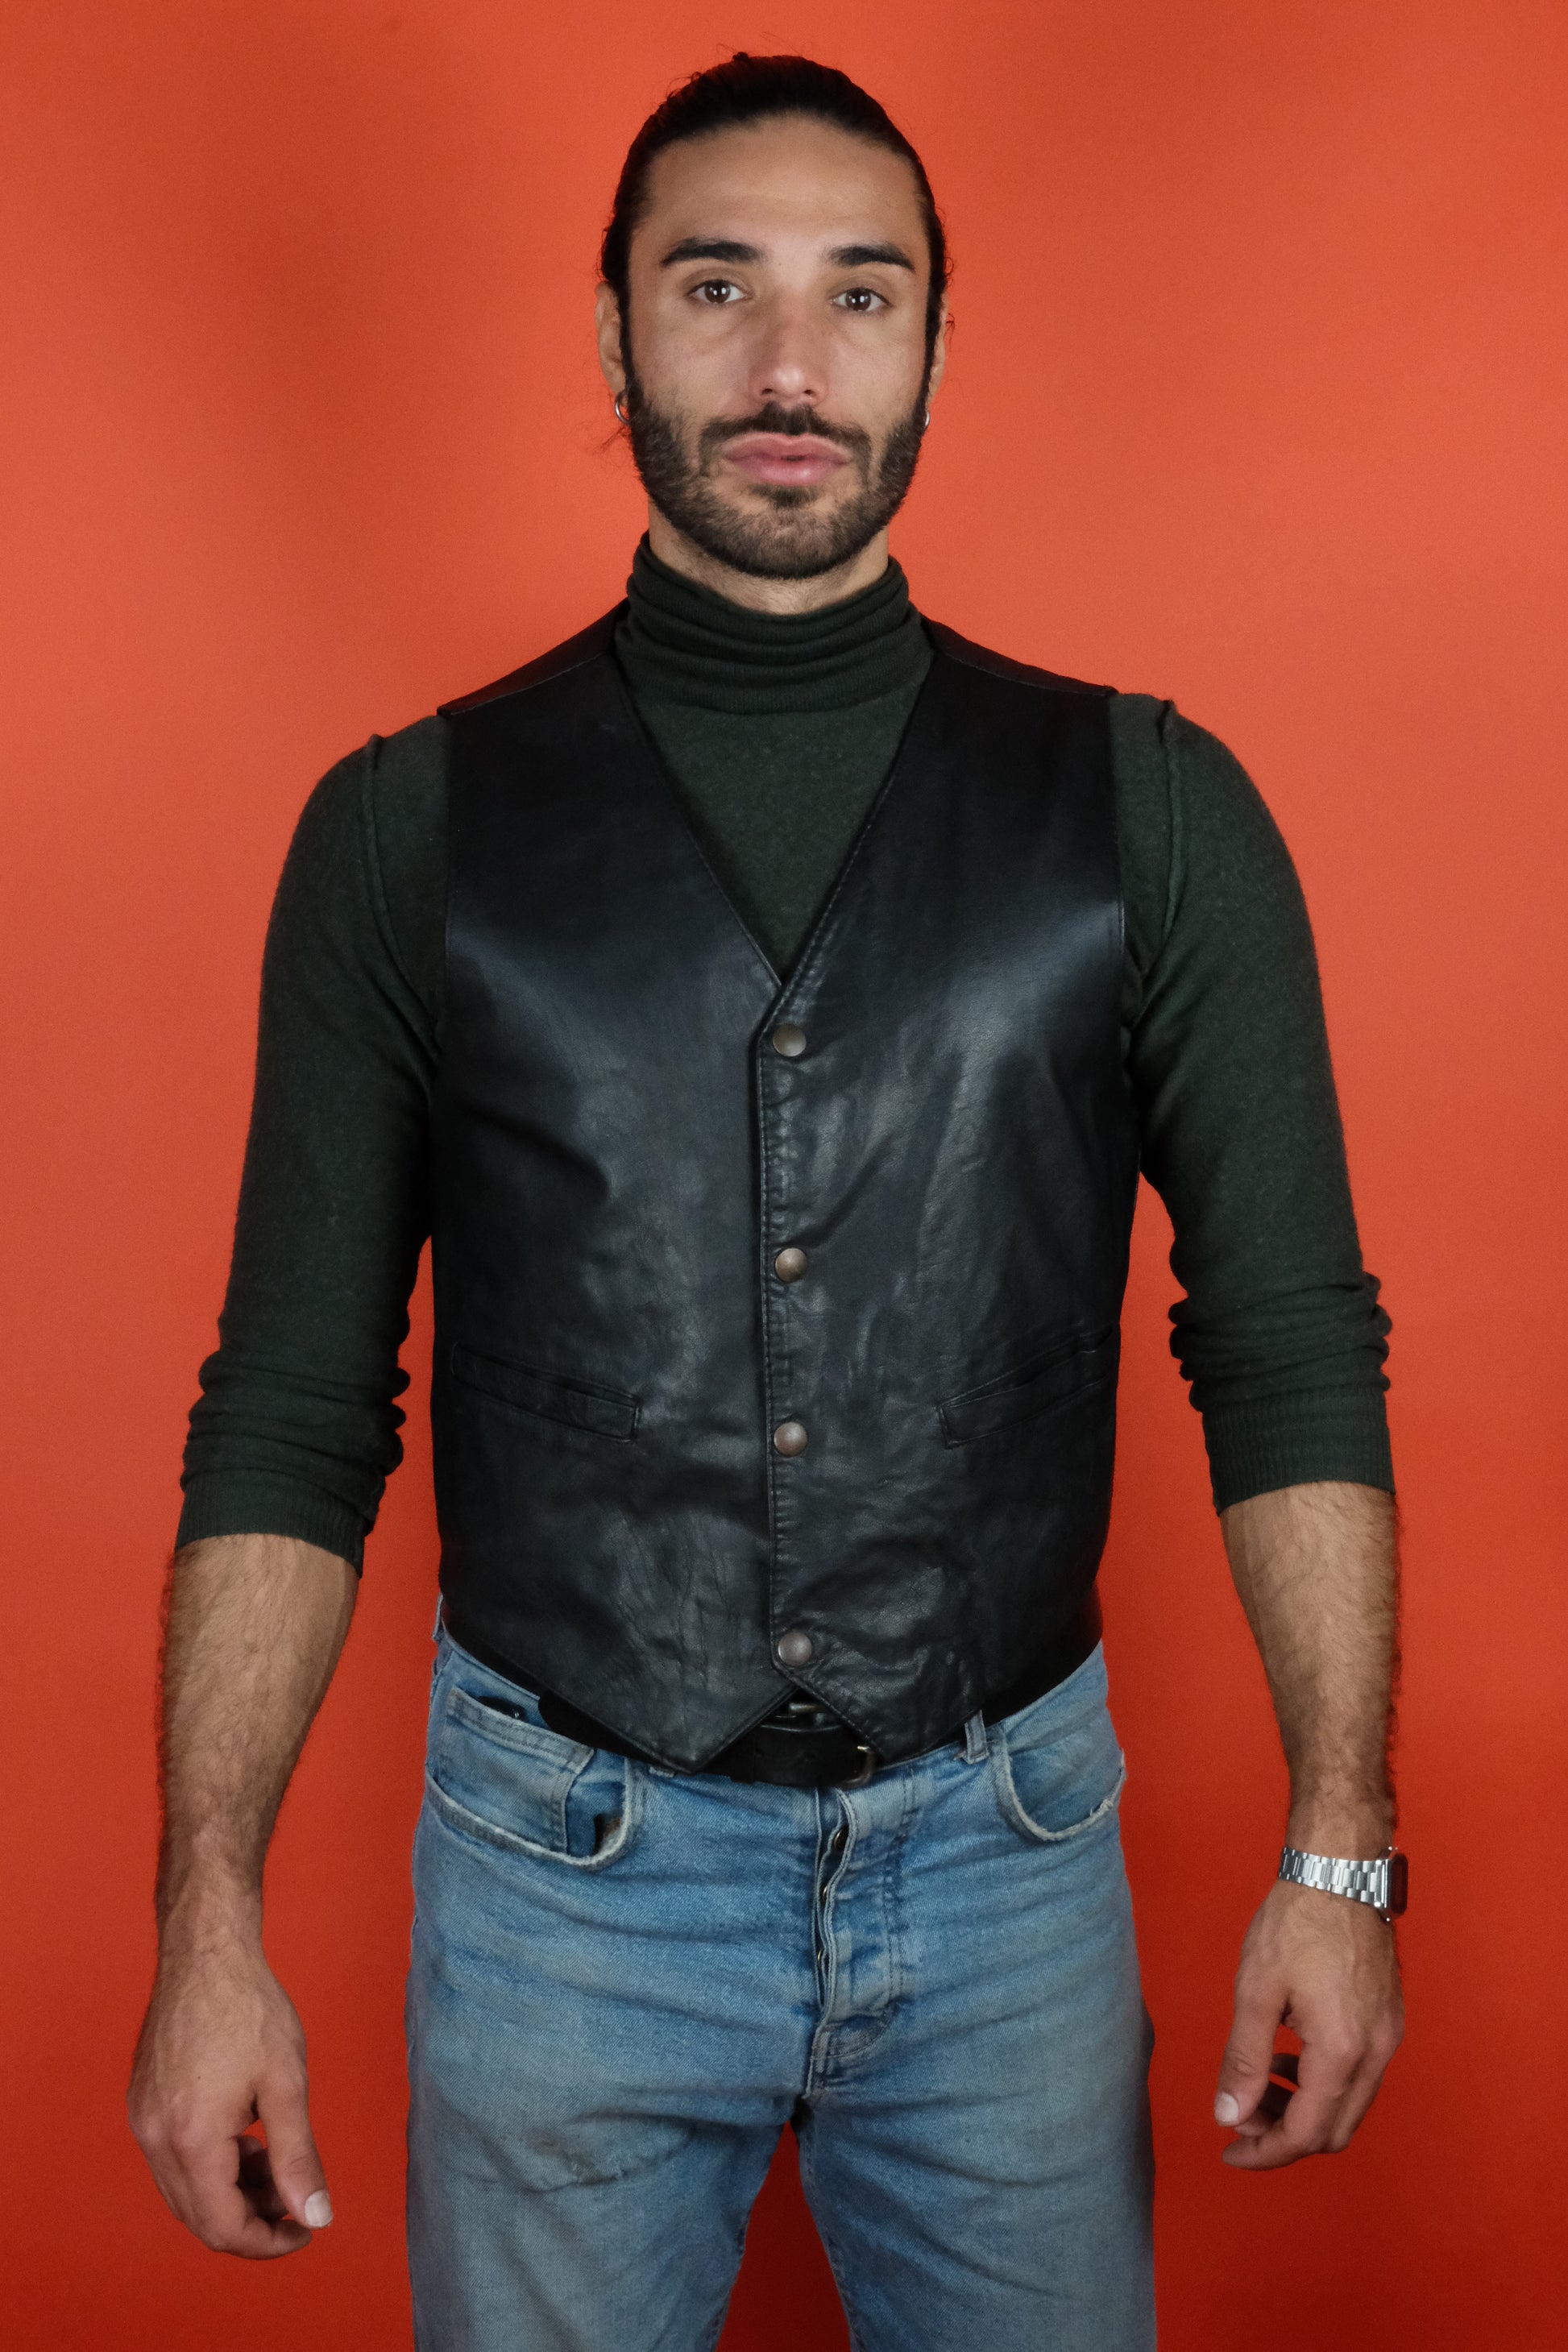 Black Leather Vest 'XL' Made in Italy - vintage clothing clochard92.com